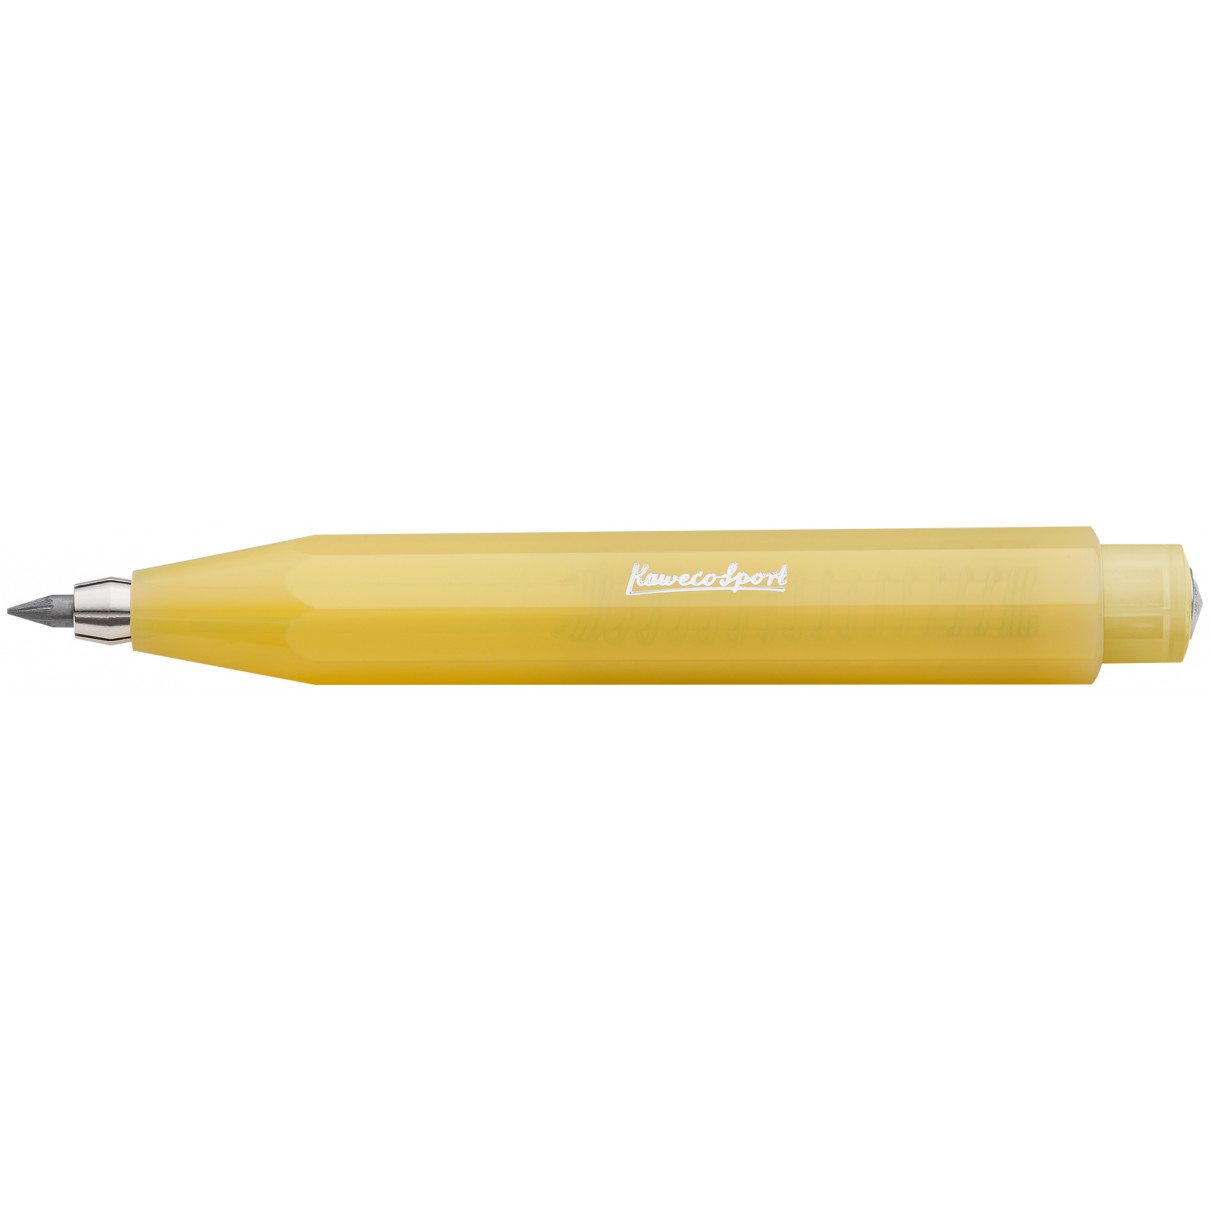 Kaweco Frosted Sport Clutch Pencil - Sweet Banana